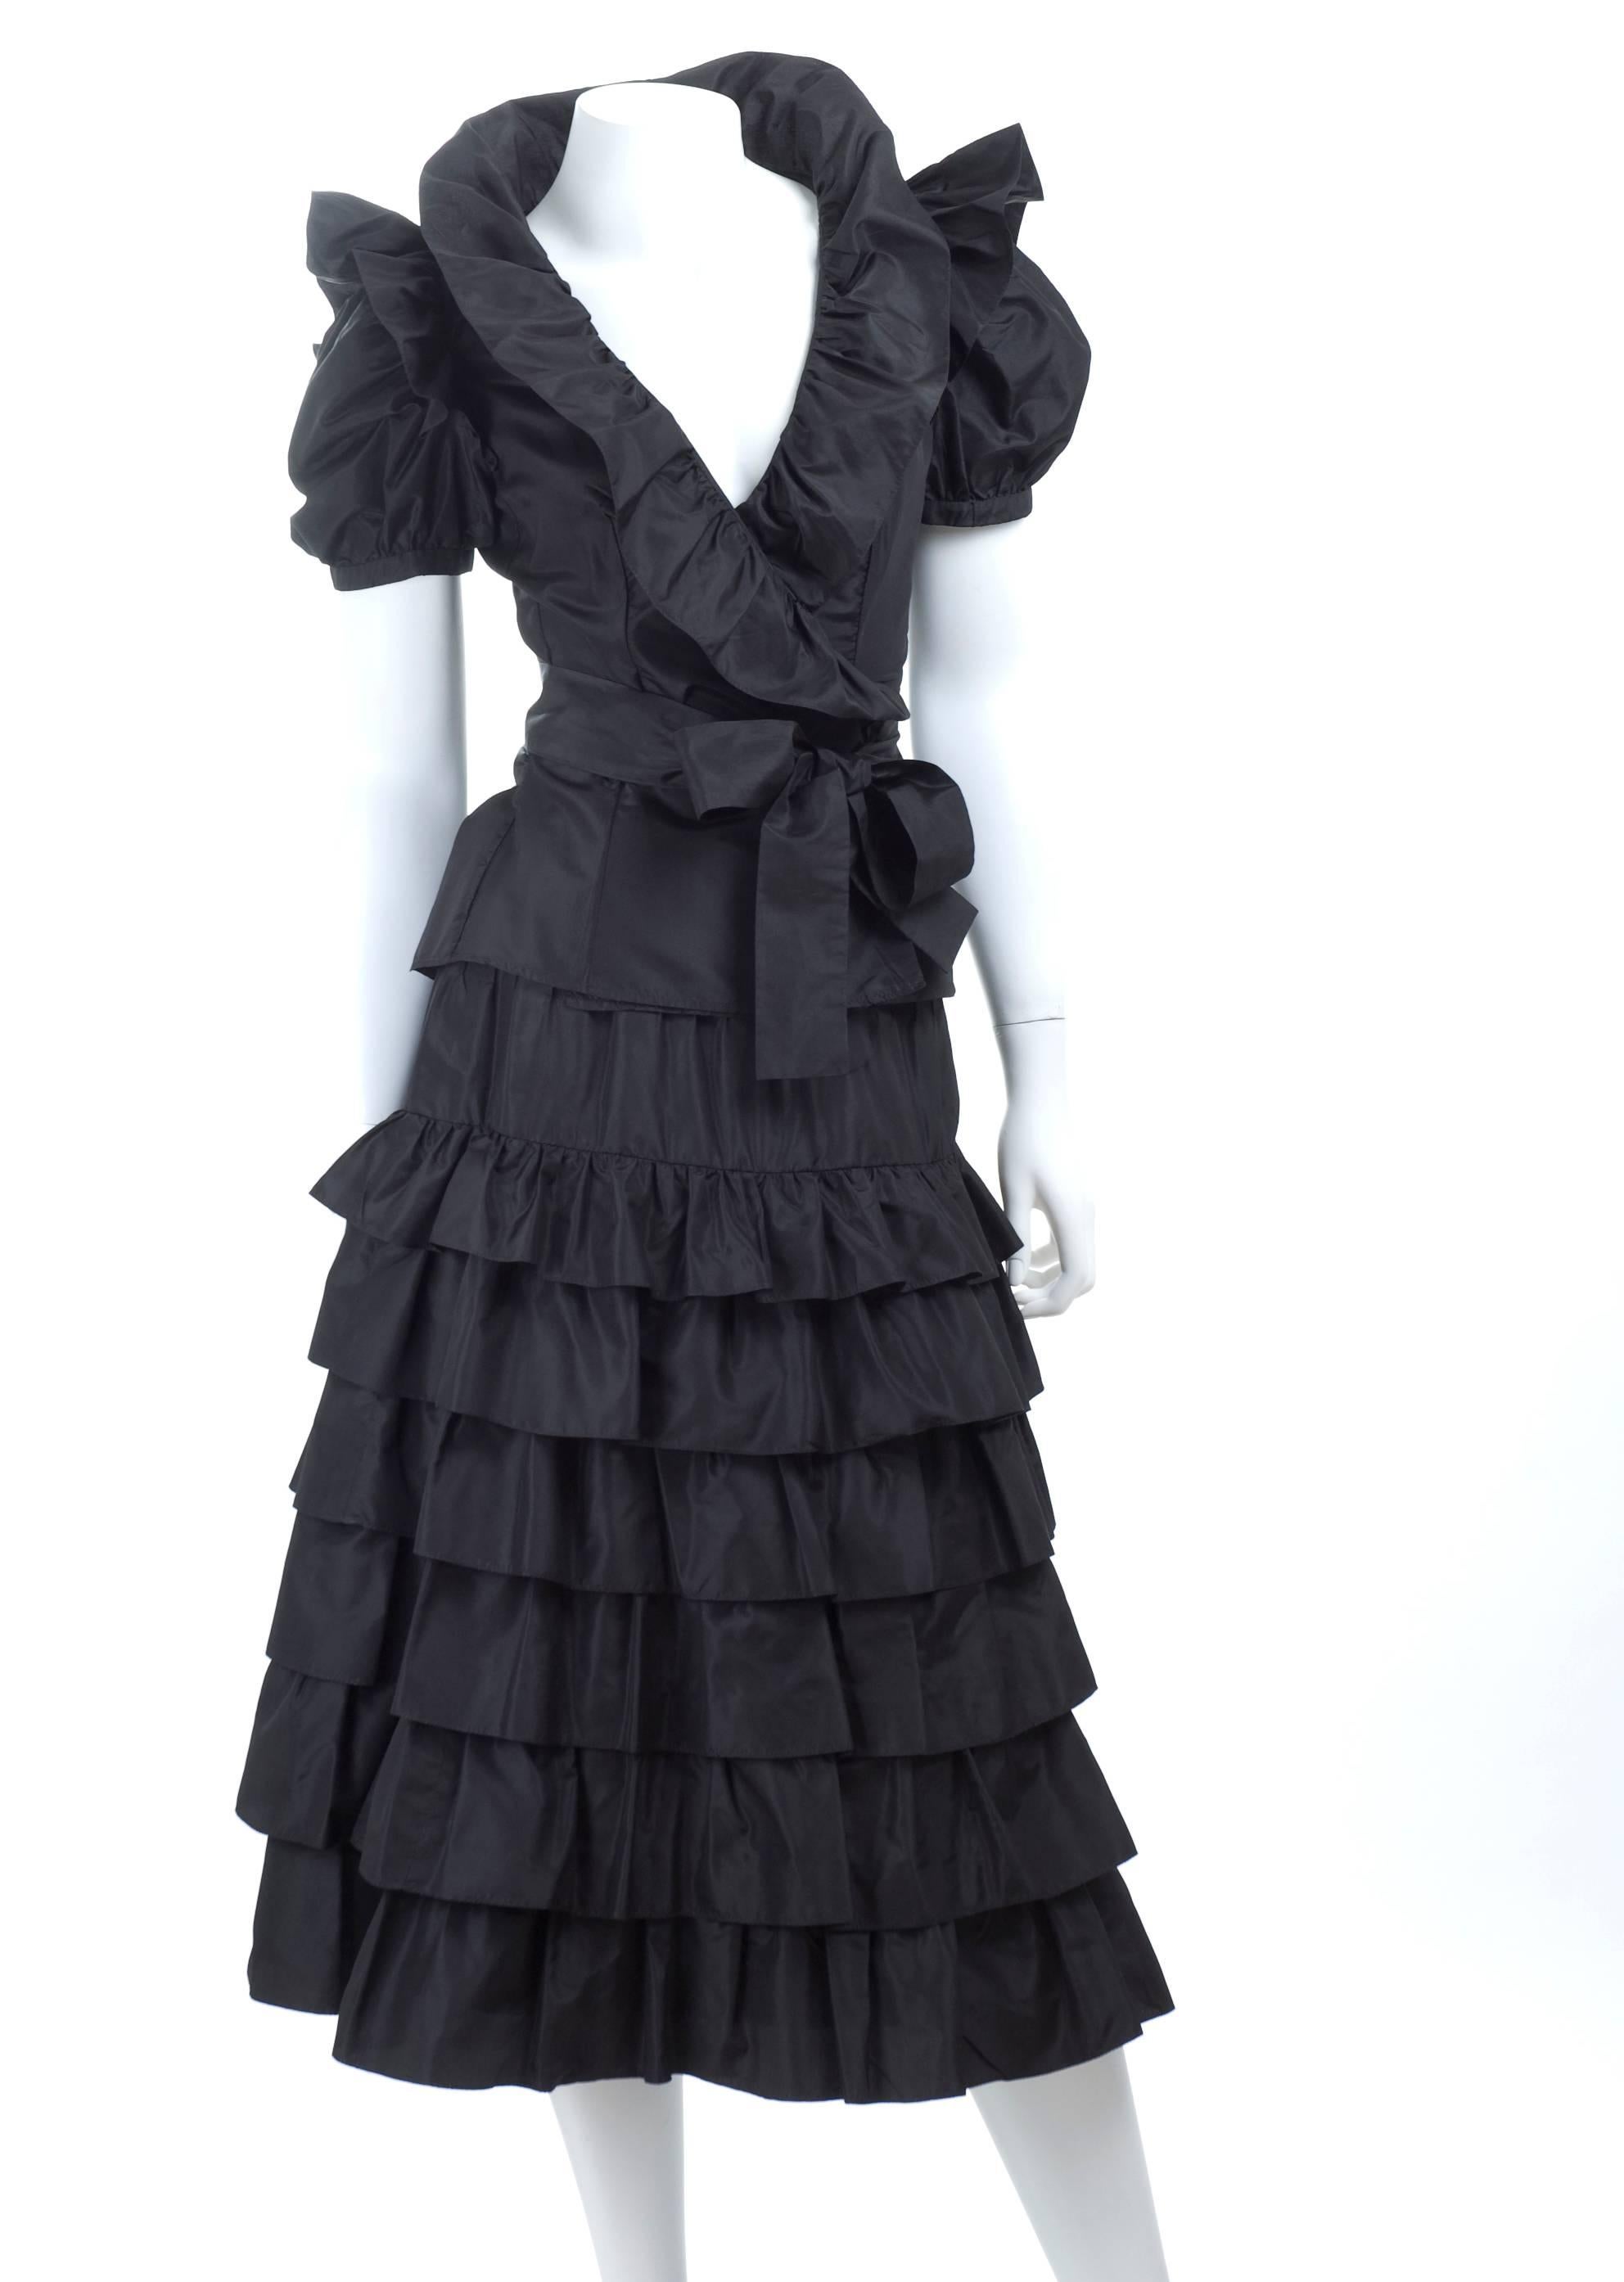 Vintage 1980s Yves Saint Laurent 2pc. taffeta dress in black. Wrap top with ruffles and tiered skirt.
Excellent condition
Size EU 38
Measurement:
Top length 21 - bust 34 inches
Skirt length 30 - waist 25 inches 